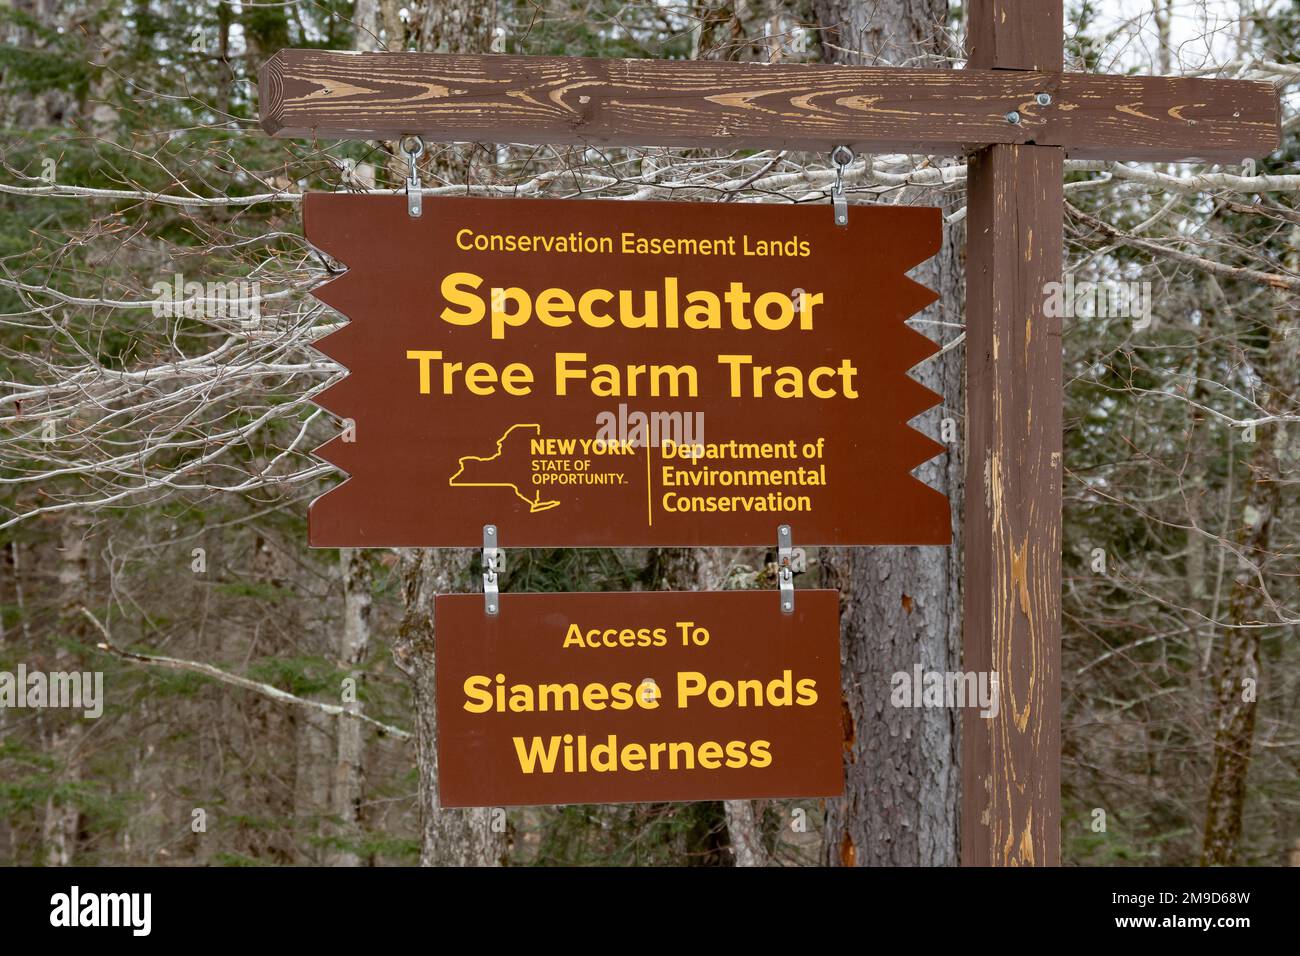 A sign at the entrance to the Speculator Tree Farm Tract in the Adirondack Mountains, NY USA with access to Siamese Ponds Wilderness Stock Photo